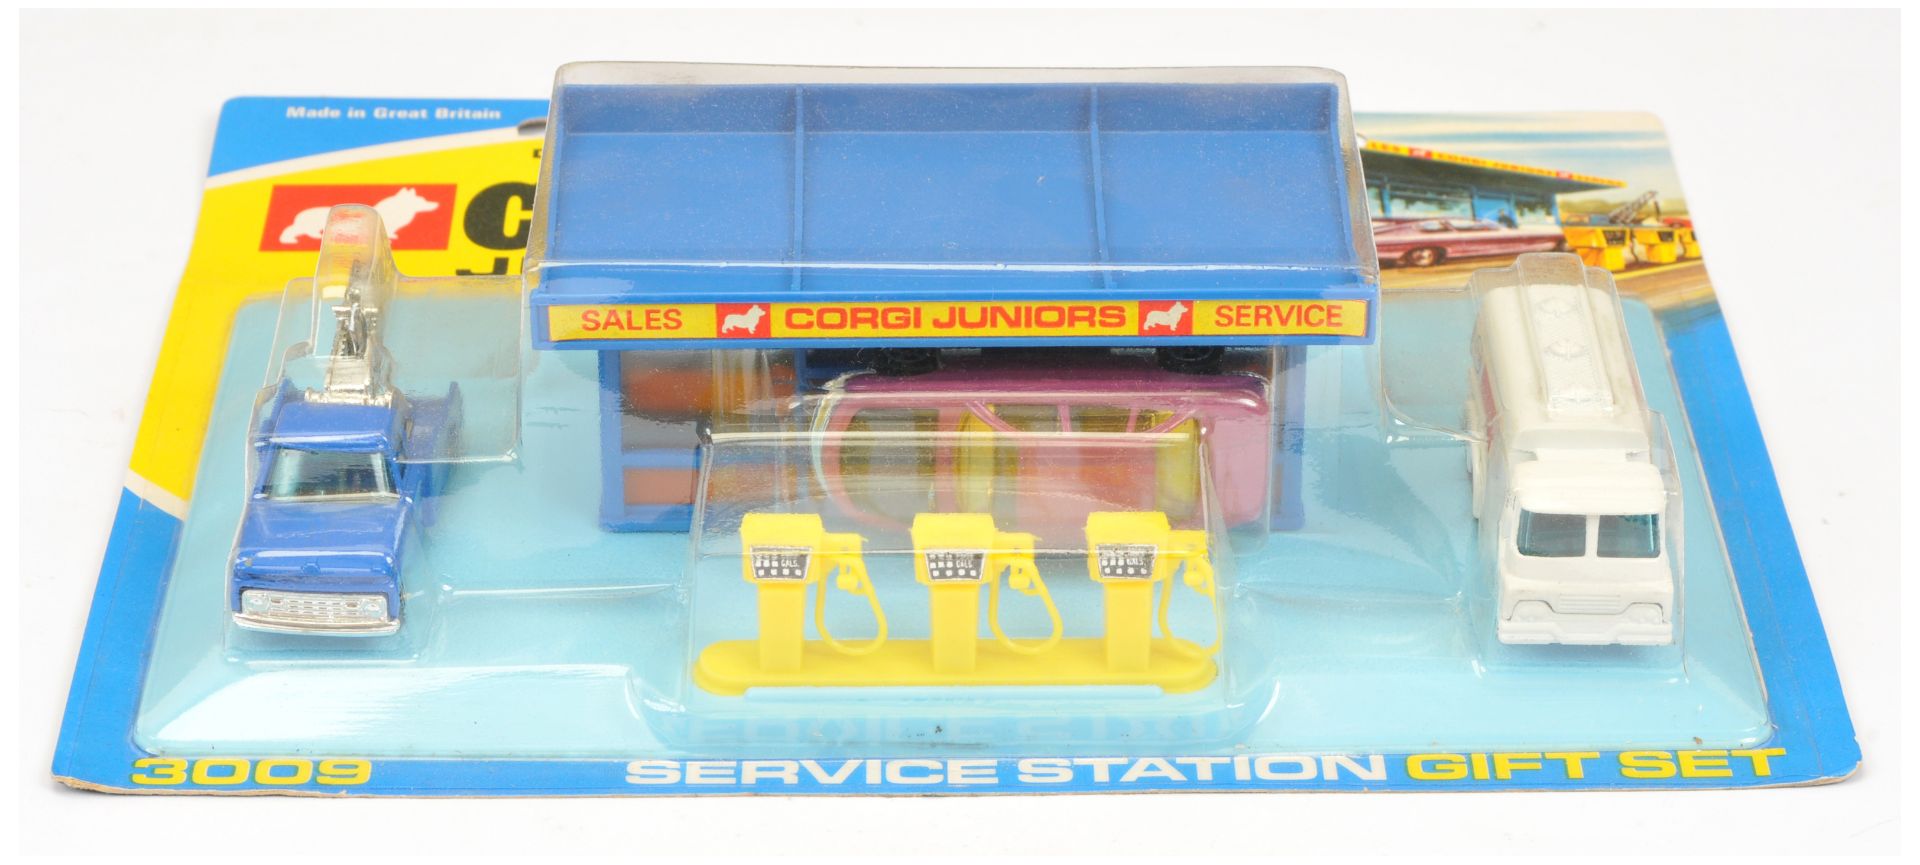 Corgi Toys Juniors 3009 Service Station Set To Include 3 X Vehicles (1) NSU RO80 - Purple with bl... - Image 5 of 6